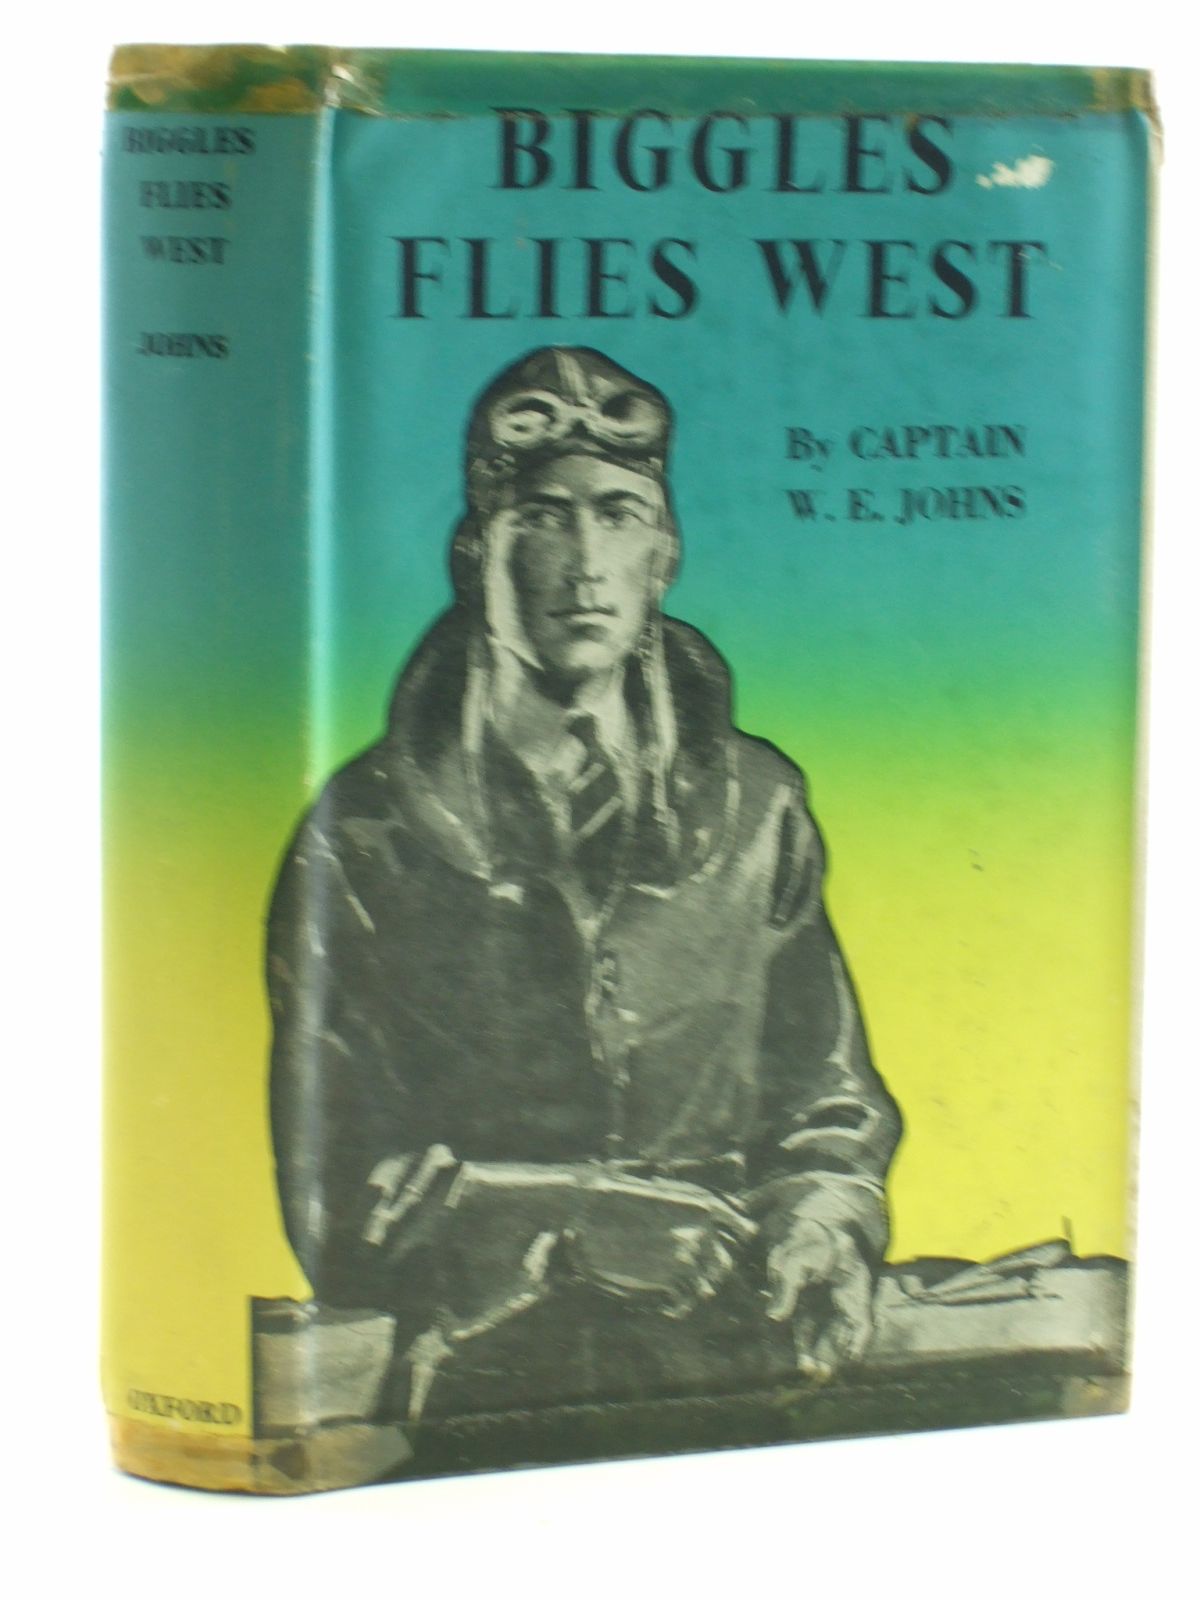 Cover of BIGGLES FLIES WEST by W.E. Johns